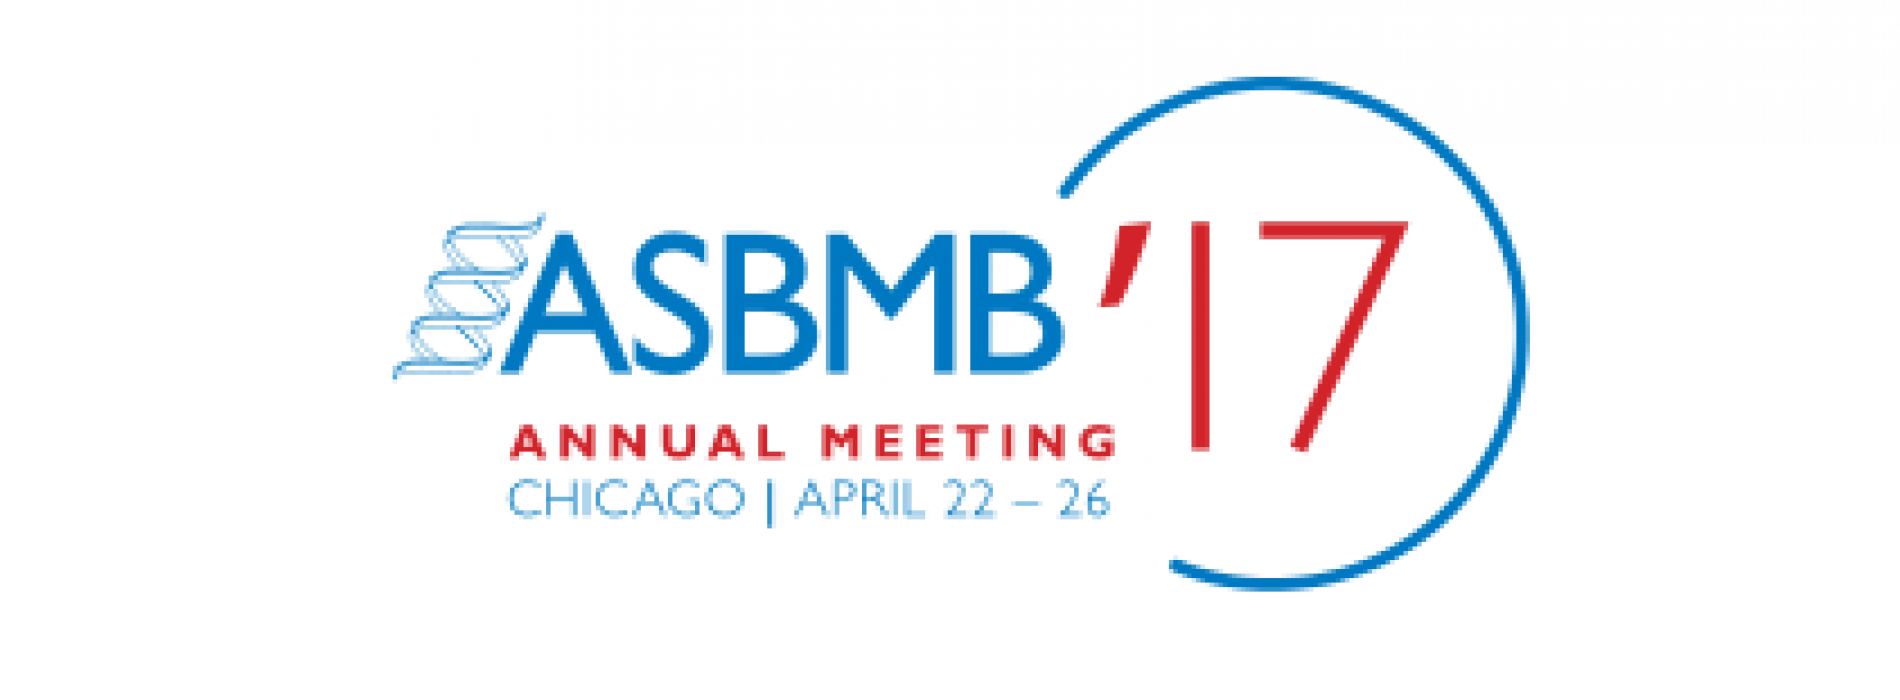 Annual meeting abstract deadline: TODAY